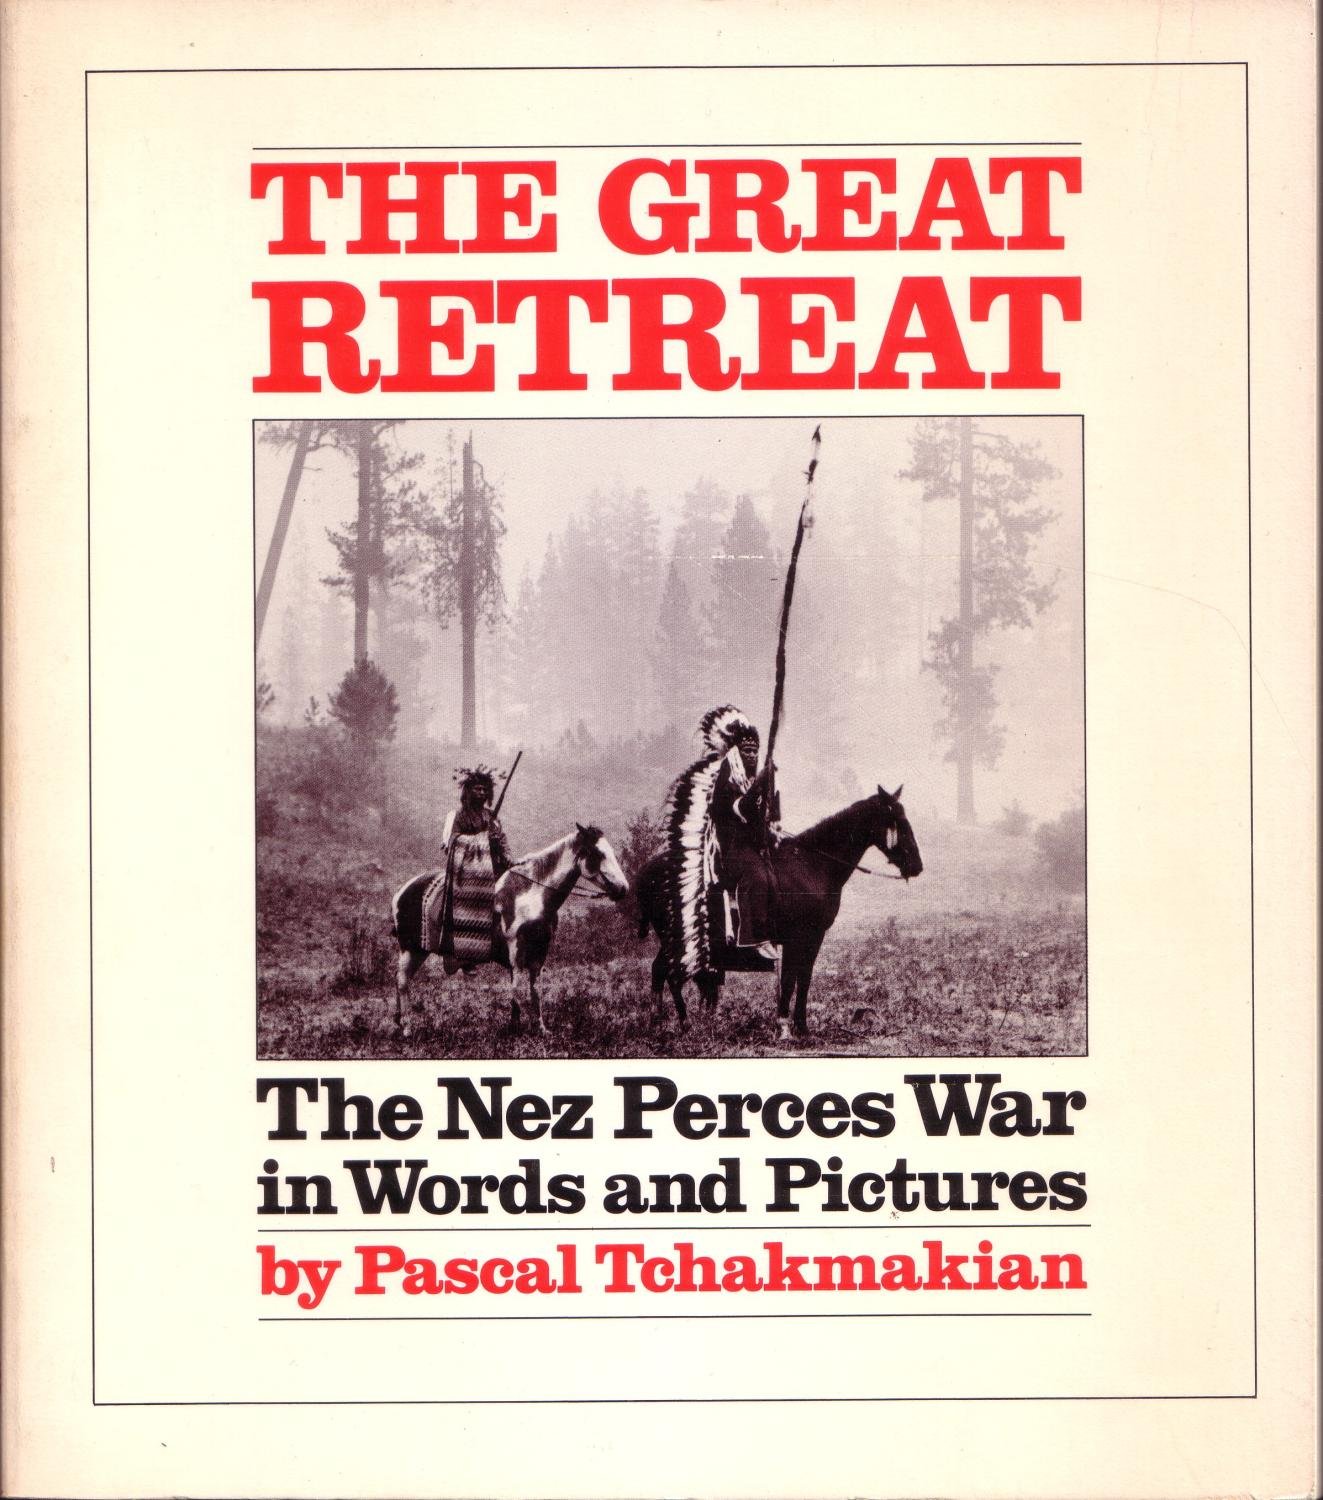 The great retreat: The Nez Perces war in words and pictures (book cover)